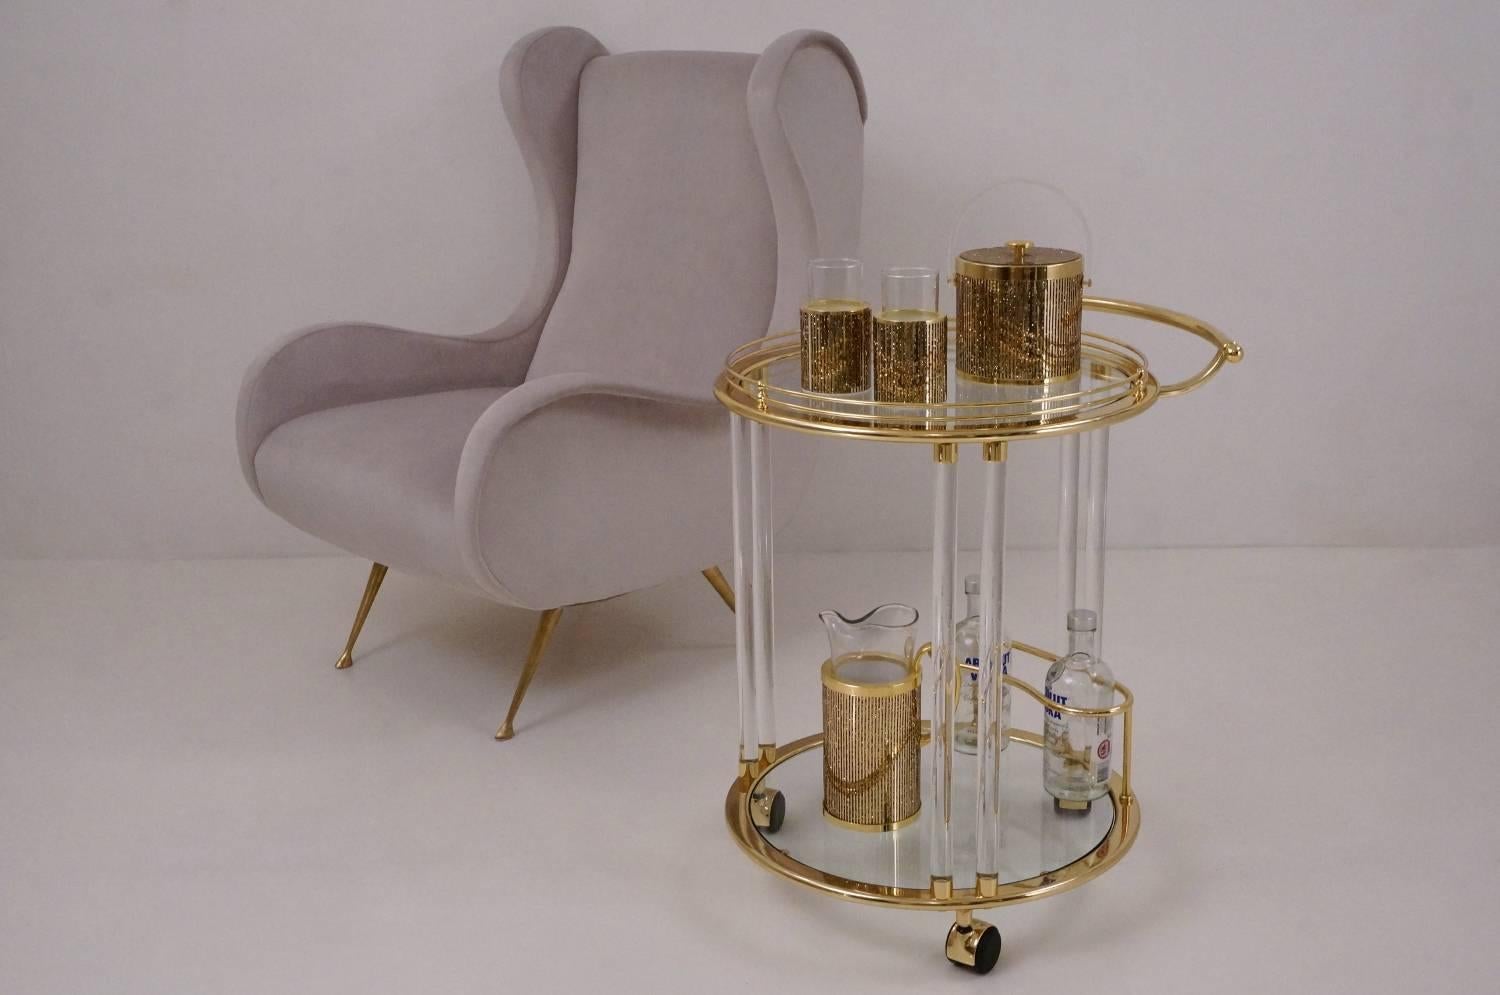 Vintage glass, brass, and lucite bar cart or trolley manufactured by Orsenigo in Milan, Italy, circa 1980. Top and bottom round glass shelves fit into brass frames. Each glass shelf is suspended by double lucite columns. Brass push btop shelf and